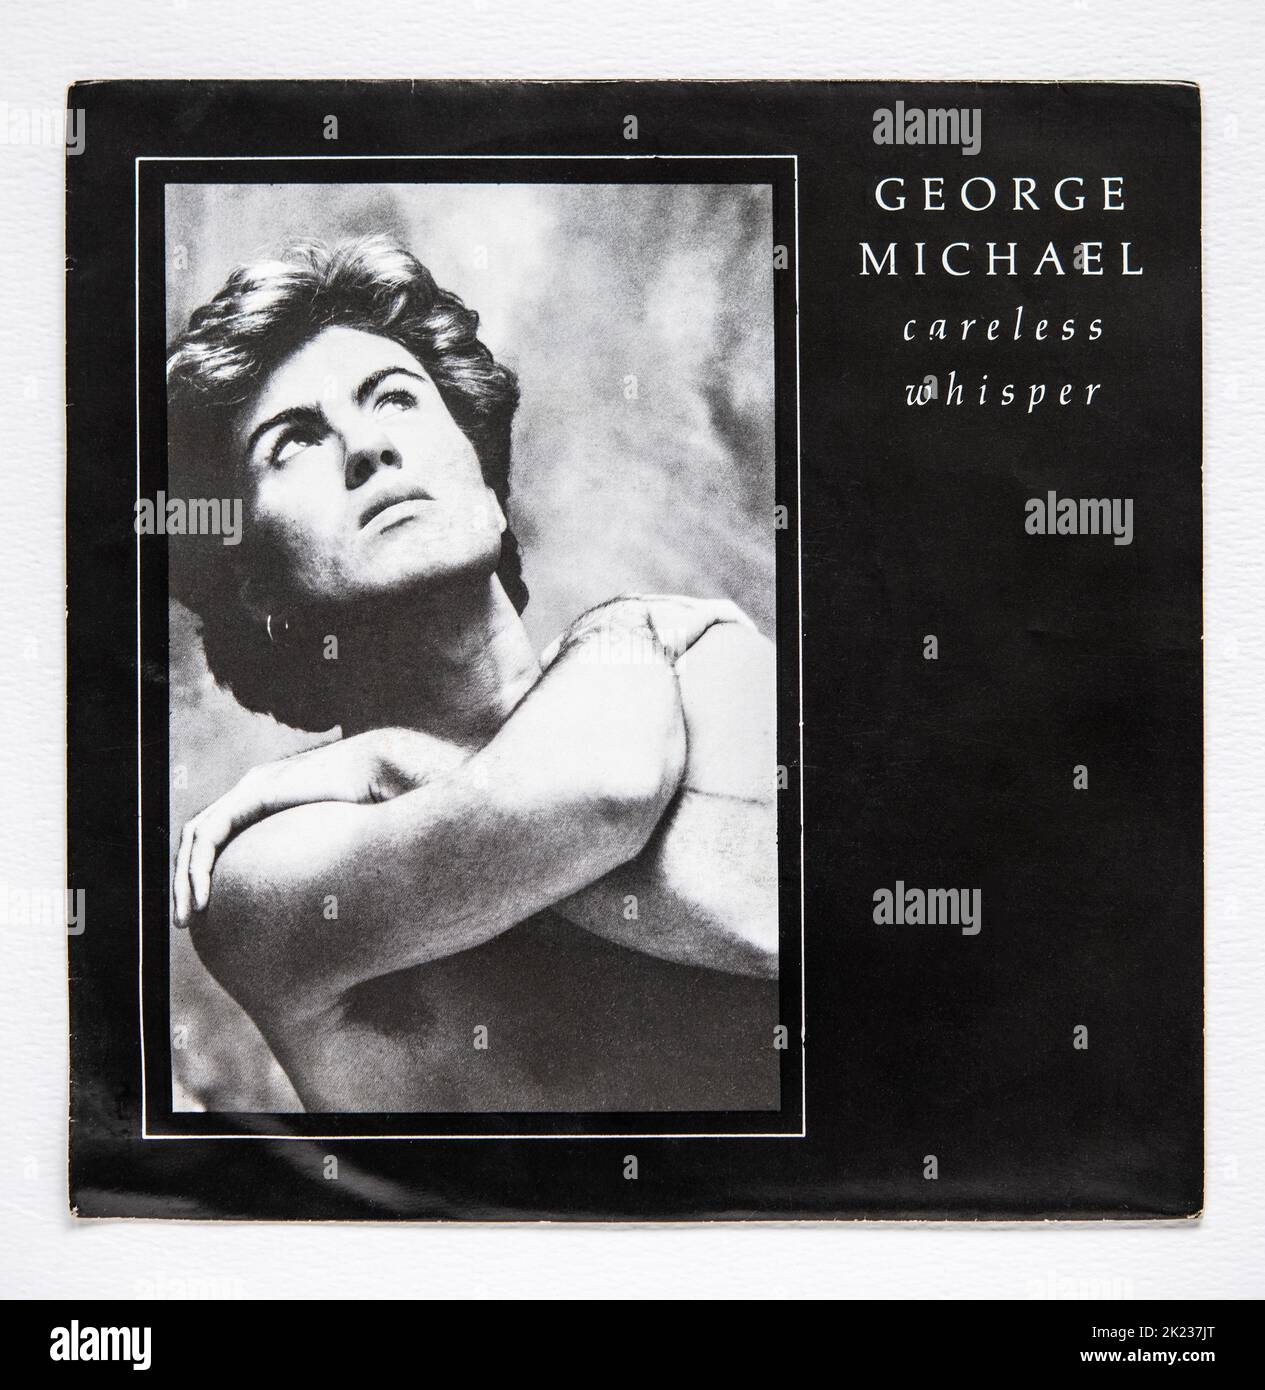 Picture cover of the seven inch single version of Careless Whisper by George Michael, which was released in 1984. Stock Photo